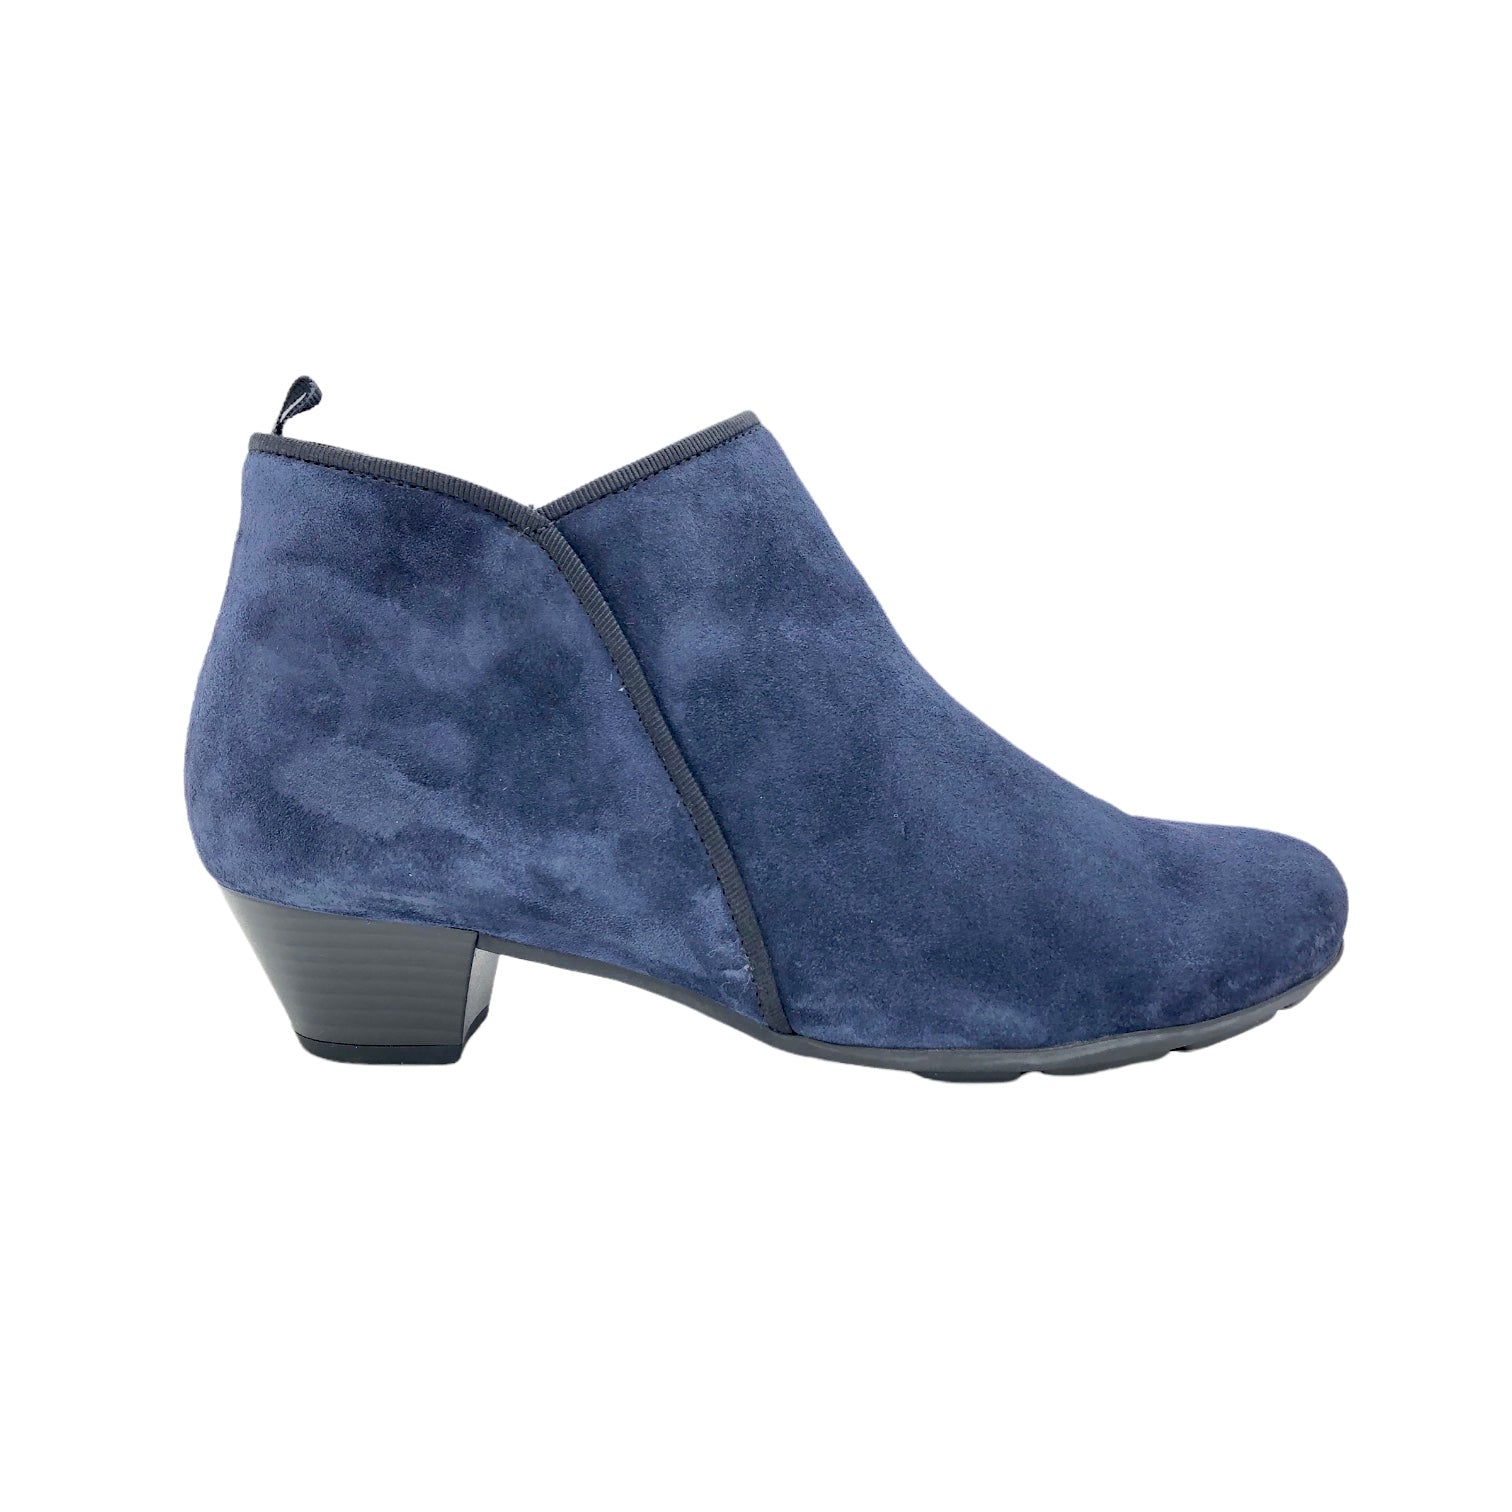 Ministerium Parat Mindst Gabor Trudy soft blue suede leather booties with dressy low heel – Arnouts  Shoes